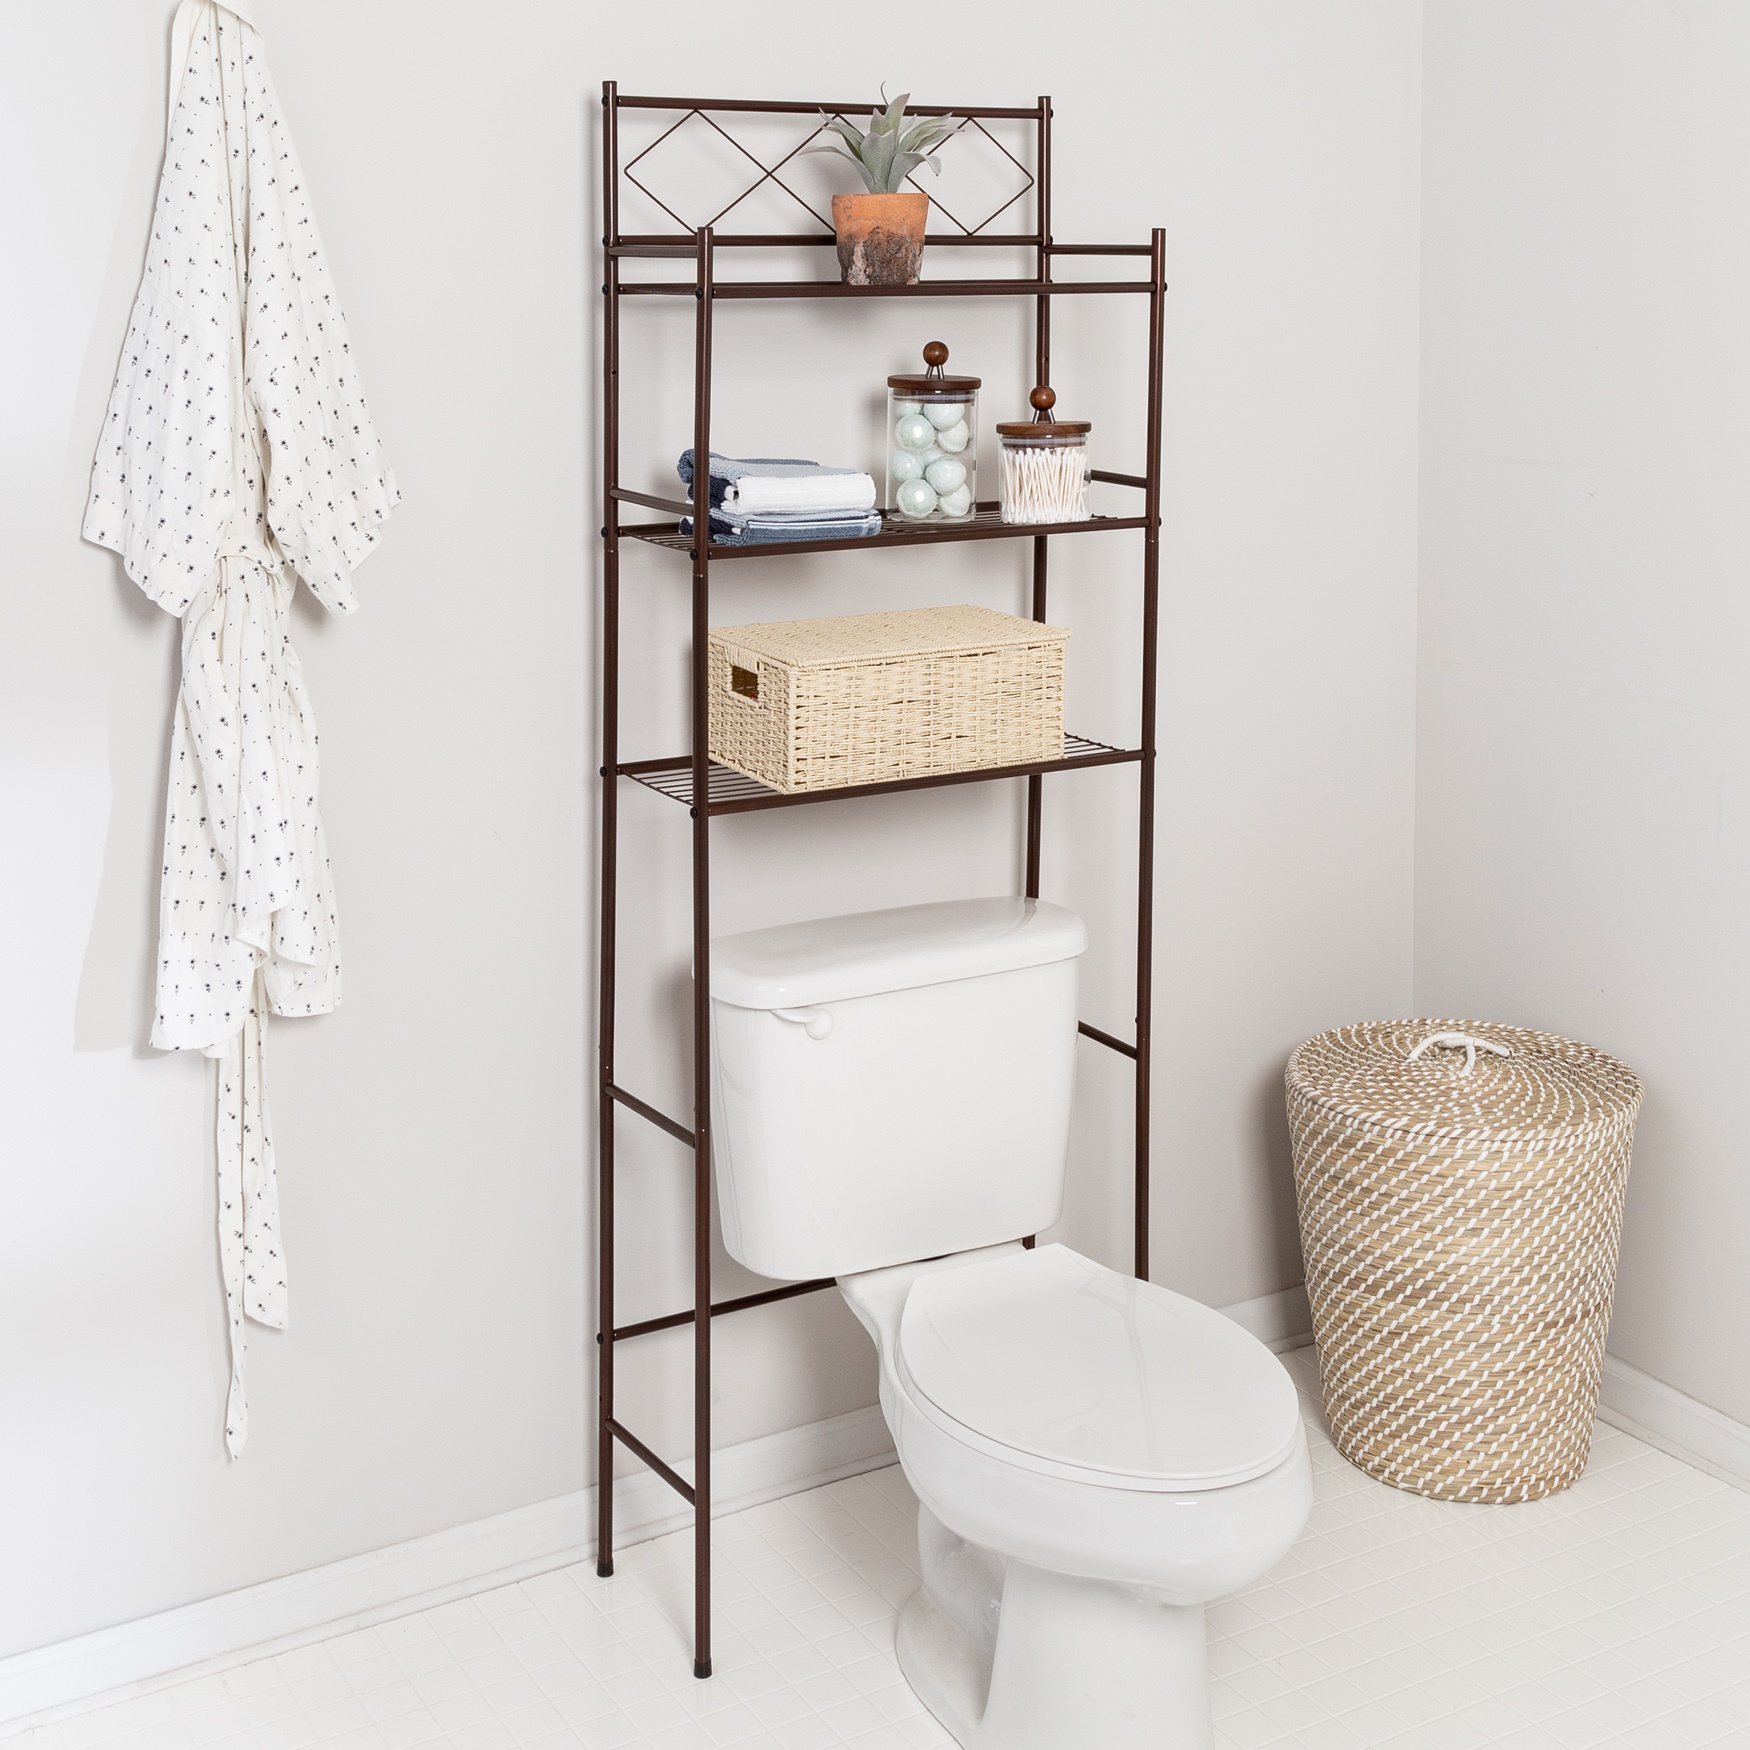 Home Expressions 3 Shelf Space Saver Over Toilet Shelving Tower 23x9.75x65, X-Silver